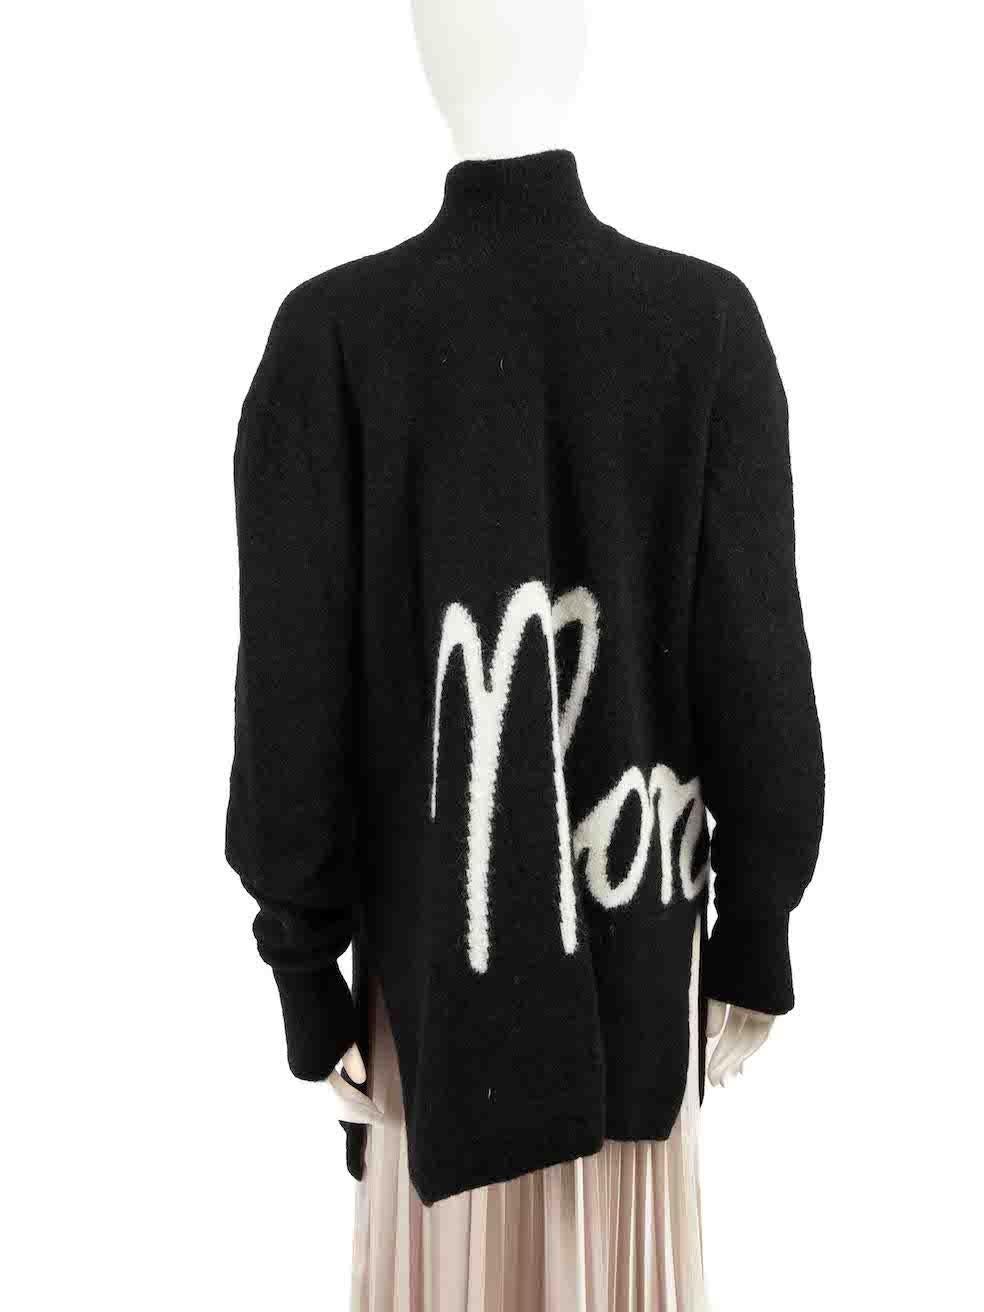 Moncler Black Alpaca Knit Turtleneck Logo Jumper Size XL In Good Condition For Sale In London, GB